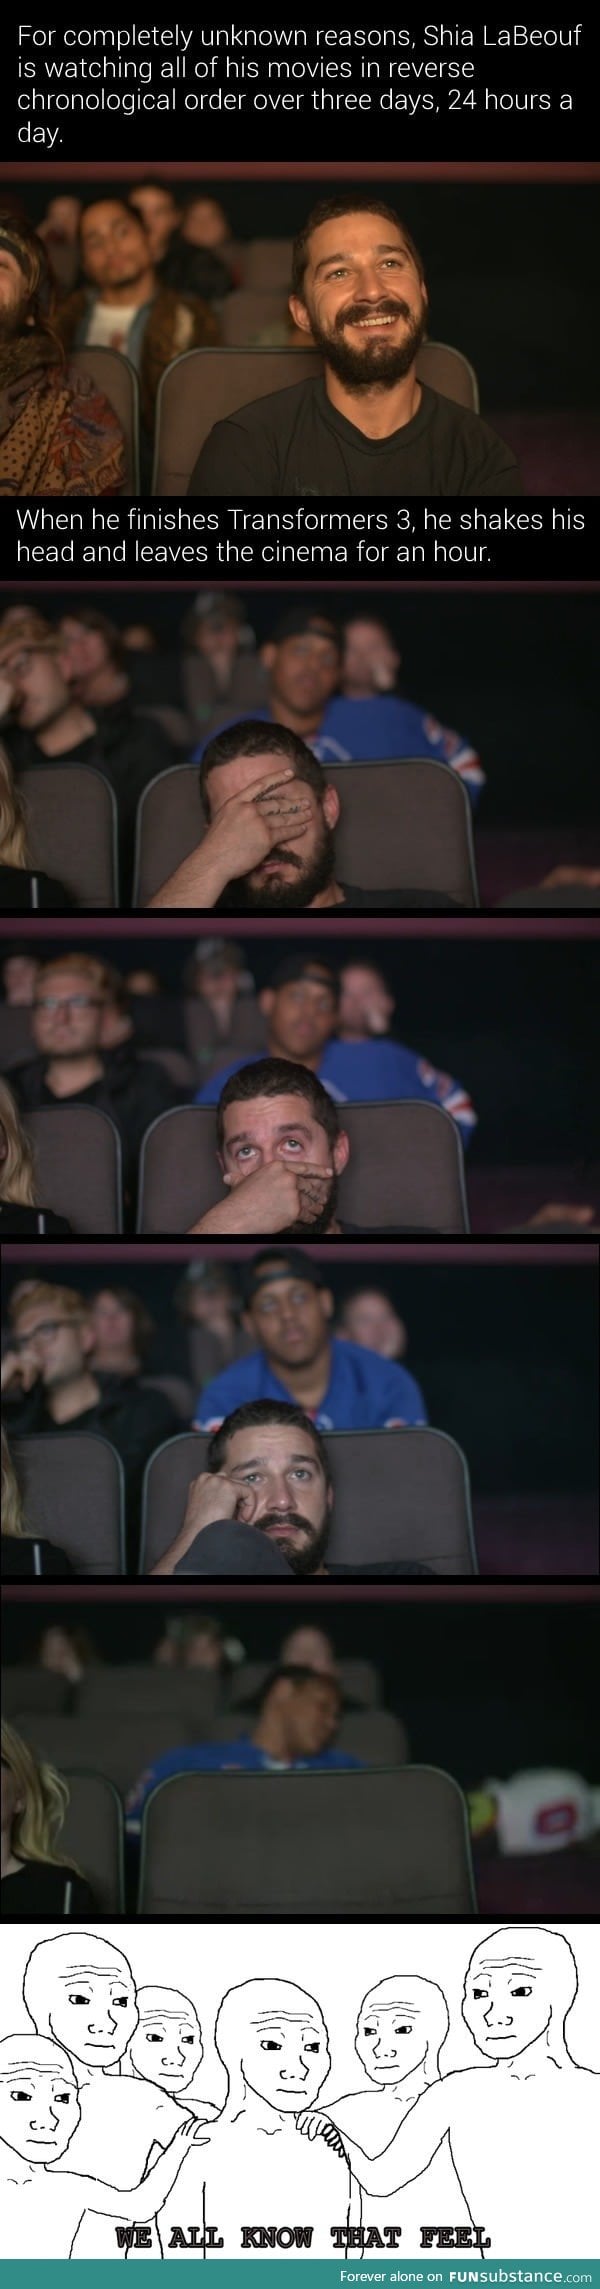 Shia LaBeouf face palmed so hard while watching the Transformers